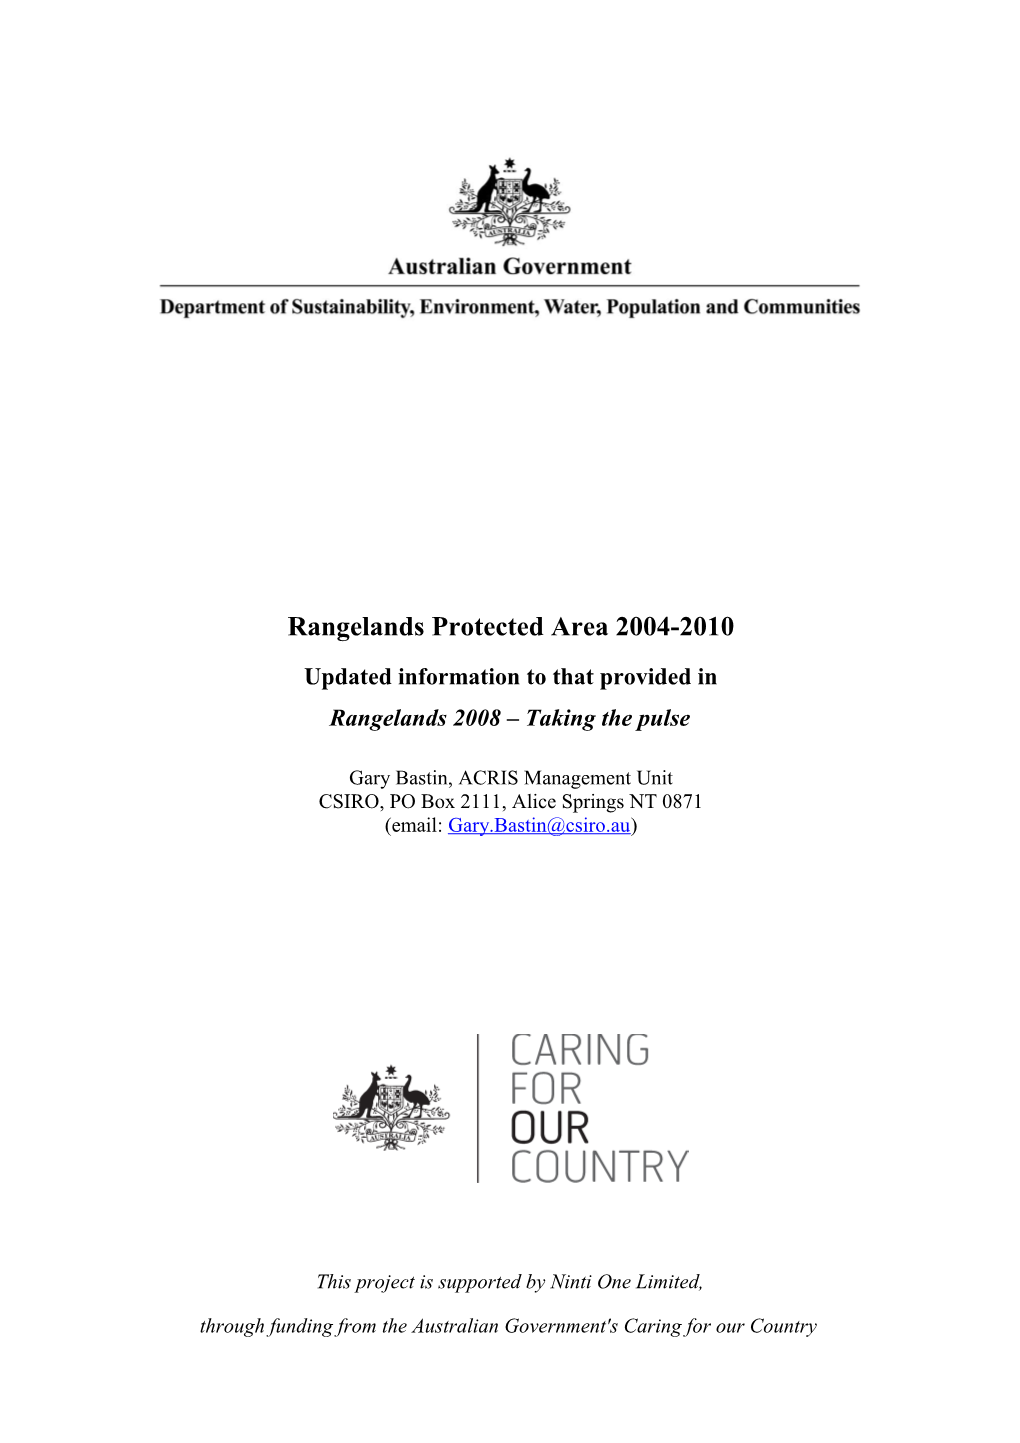 Rangelands Protected Area 2004-2010 - Updated Information to That Provided in Rangelands